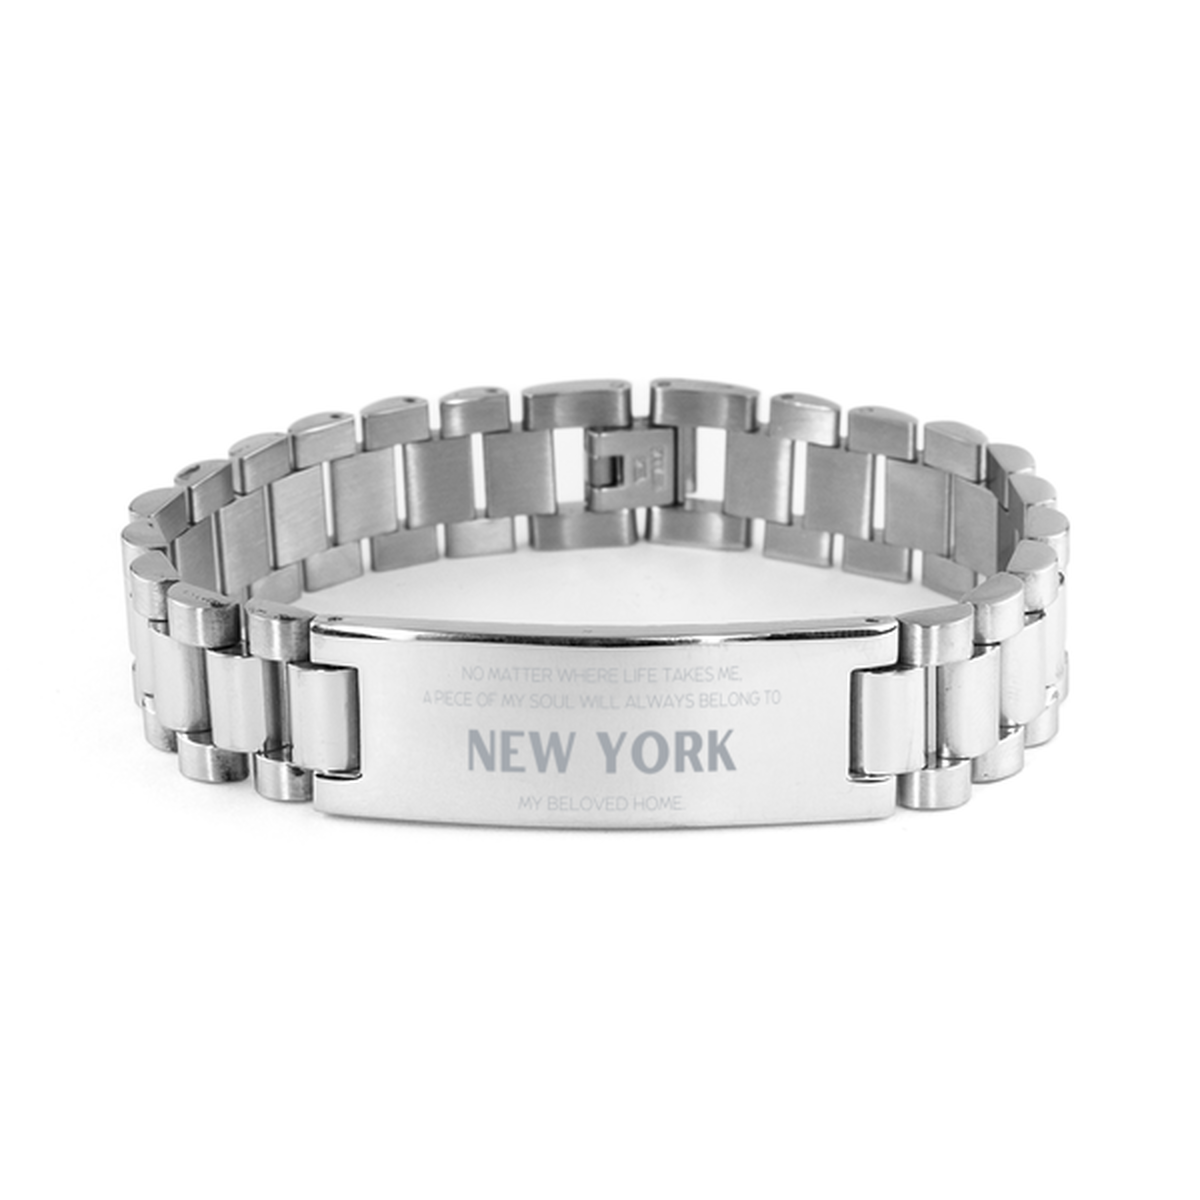 Love New York State Gifts, My soul will always belong to New York, Proud Ladder Stainless Steel Bracelet, Birthday Unique Gifts For New York Men, Women, Friends